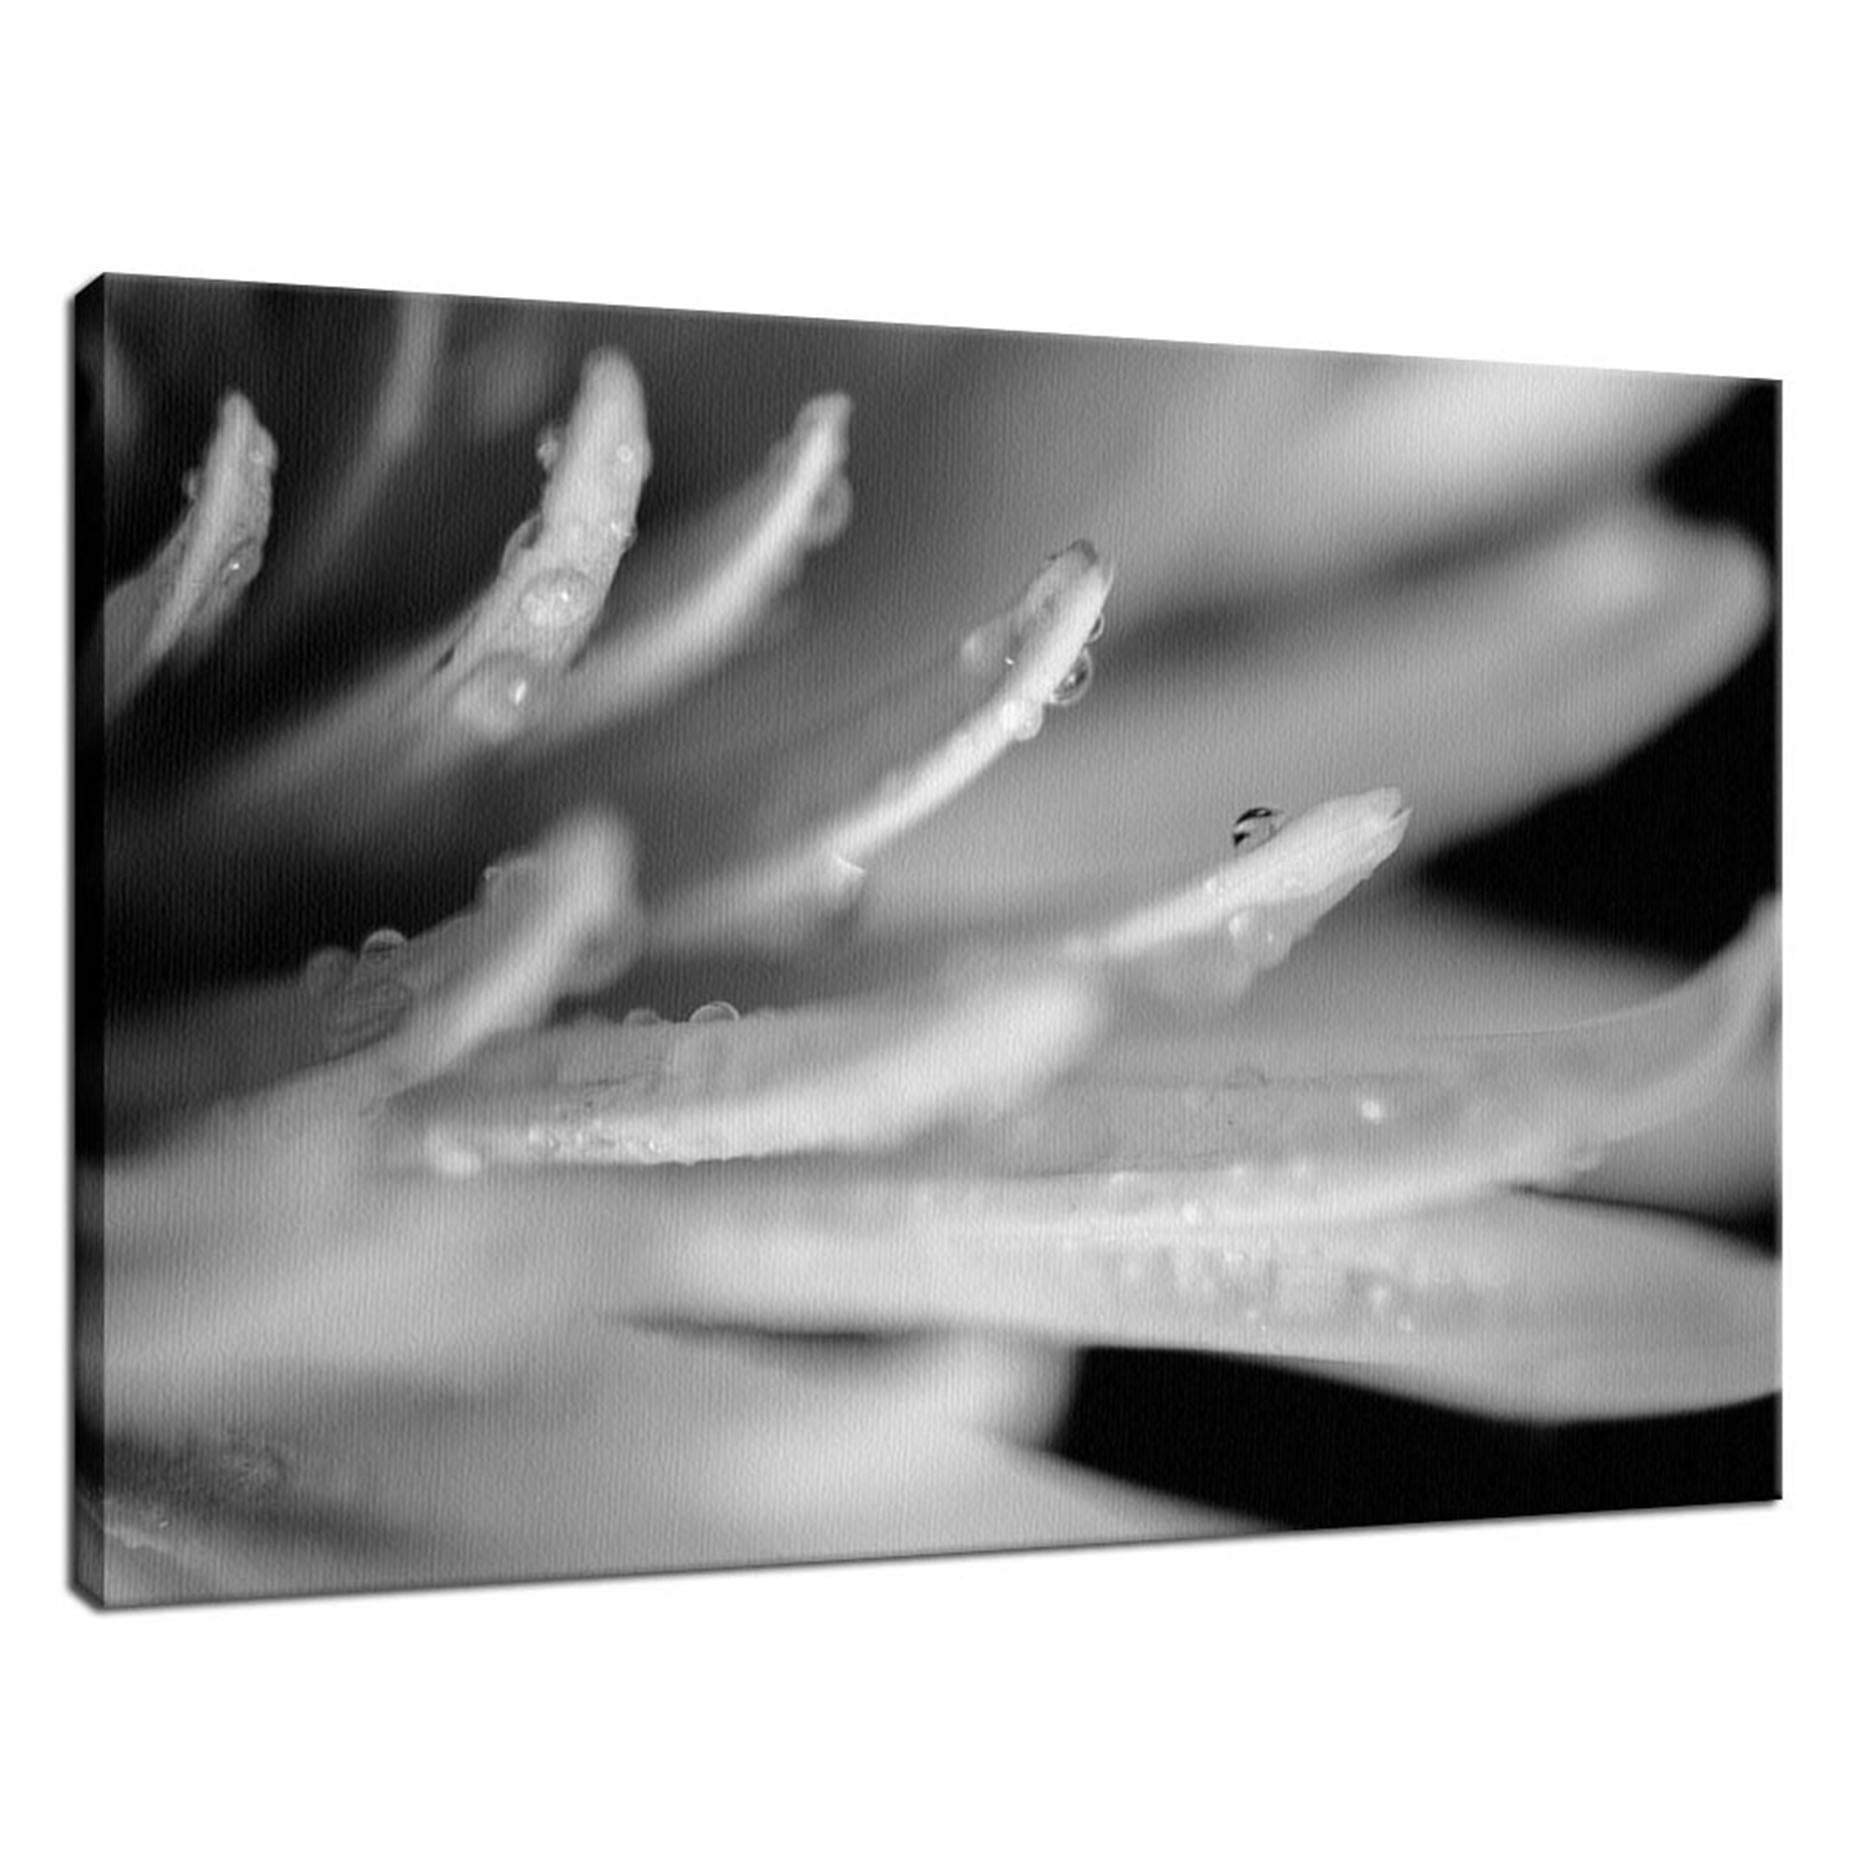 Droplets on Petals in Black & White Nature / Floral Photo Fine Art Canvas Wall Art Prints  - PIPAFINEART